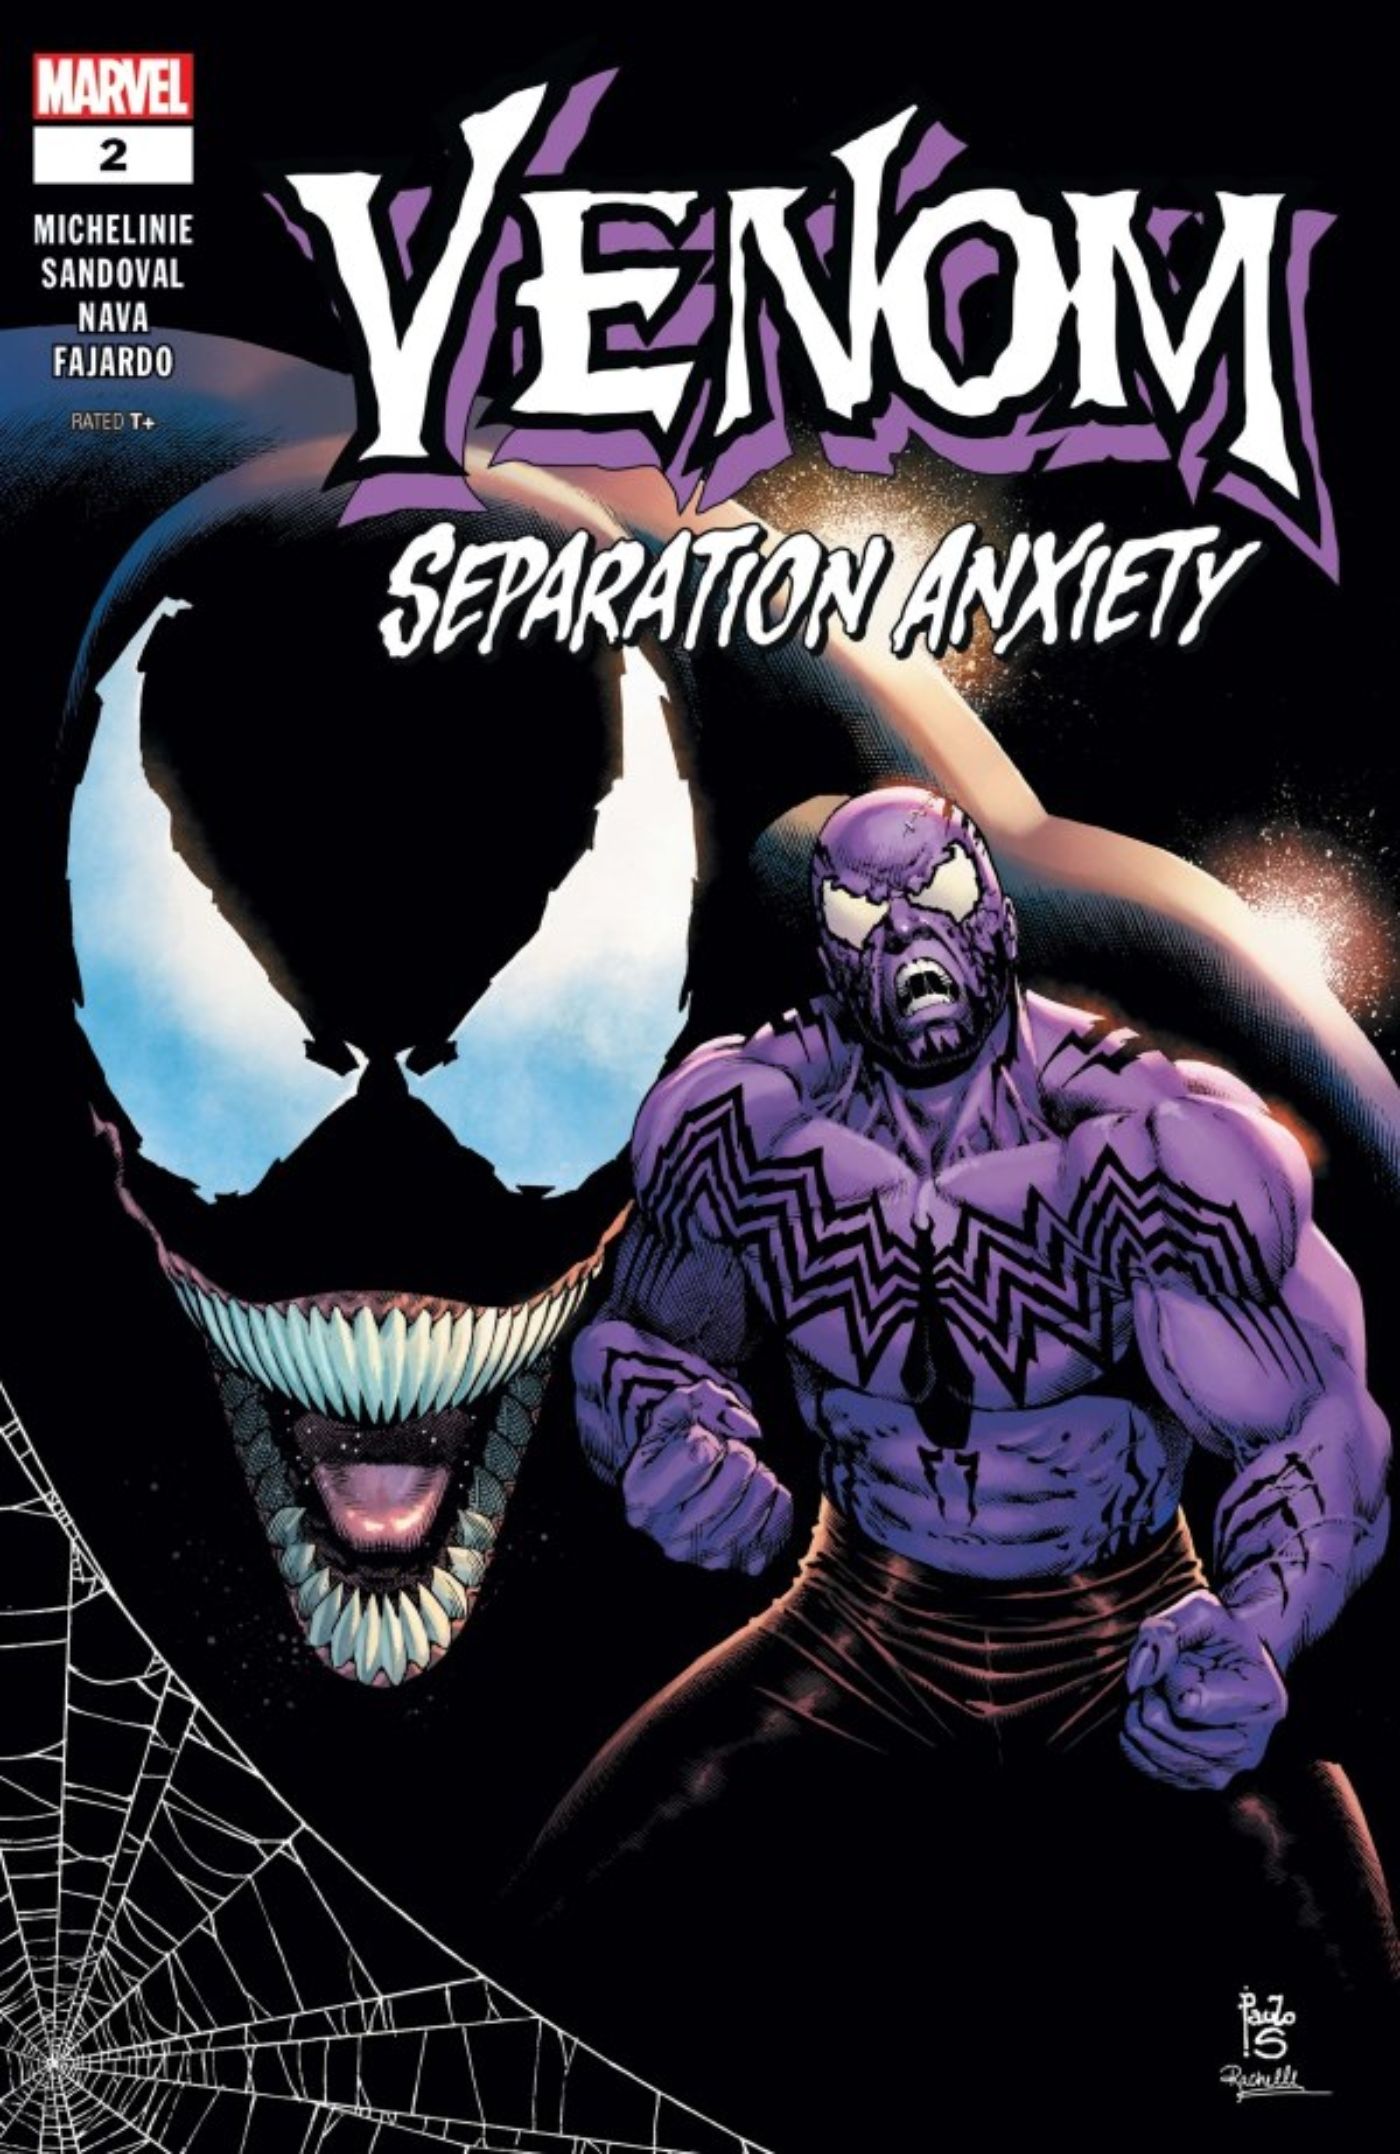 Venom: Separation Anxiety #2 cover featuring Venom and the Purple Man with a Venomized upgrade.